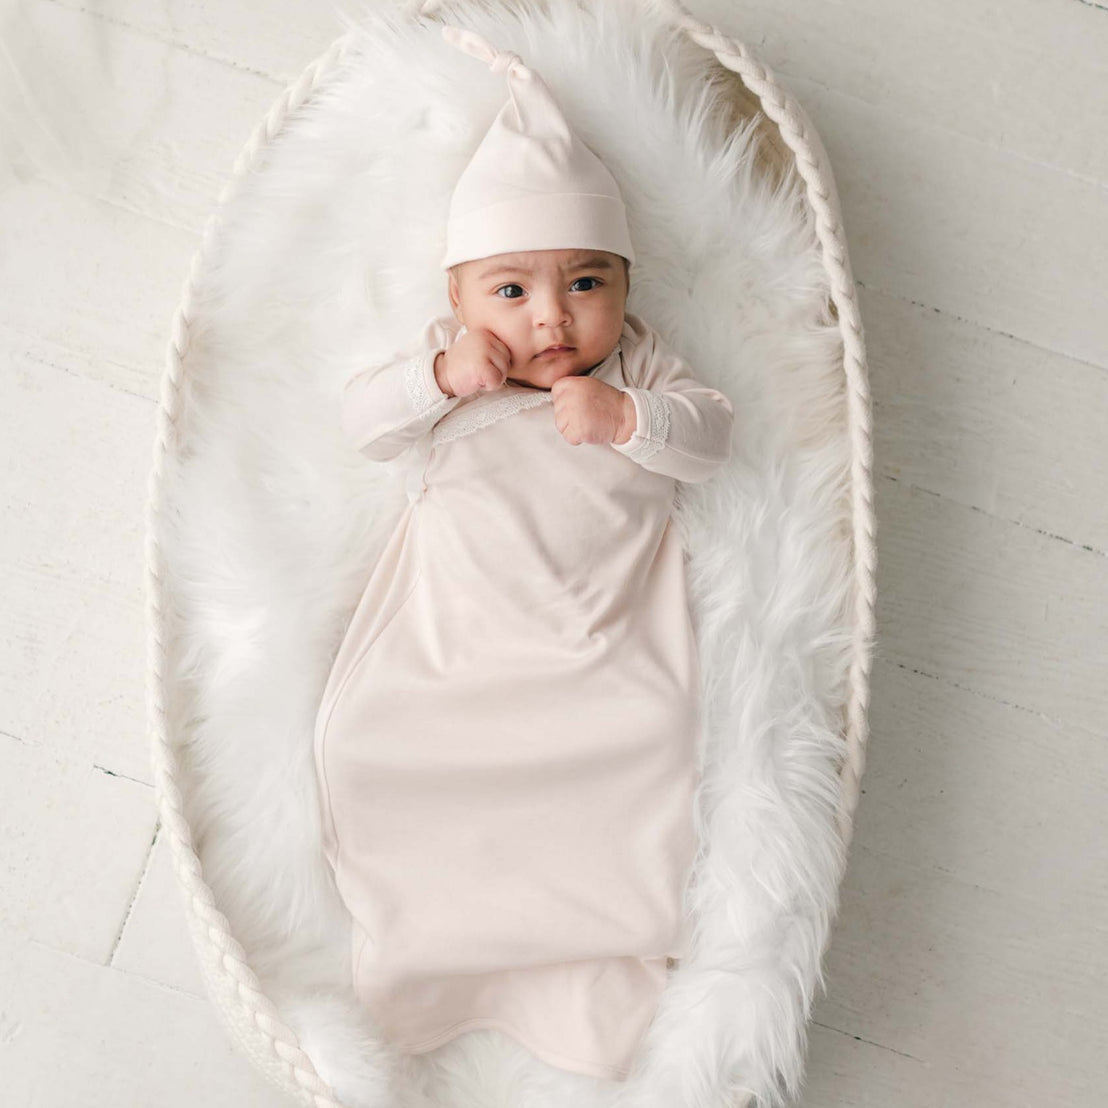 Baby girl in pink newborn layette gown and cotton knot hat laying in basket